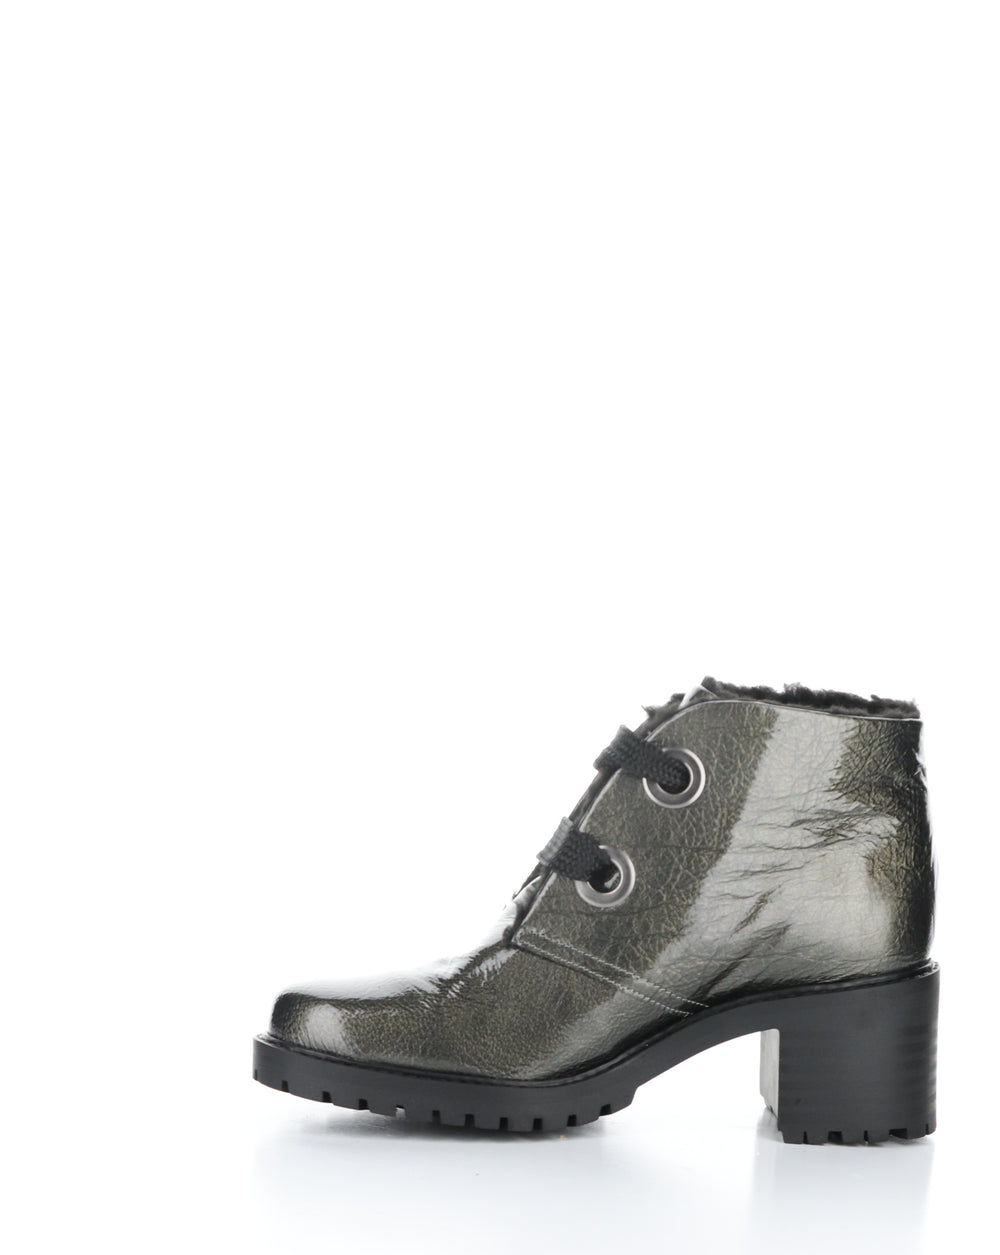 INDEX PEWTER Round Toe Boots